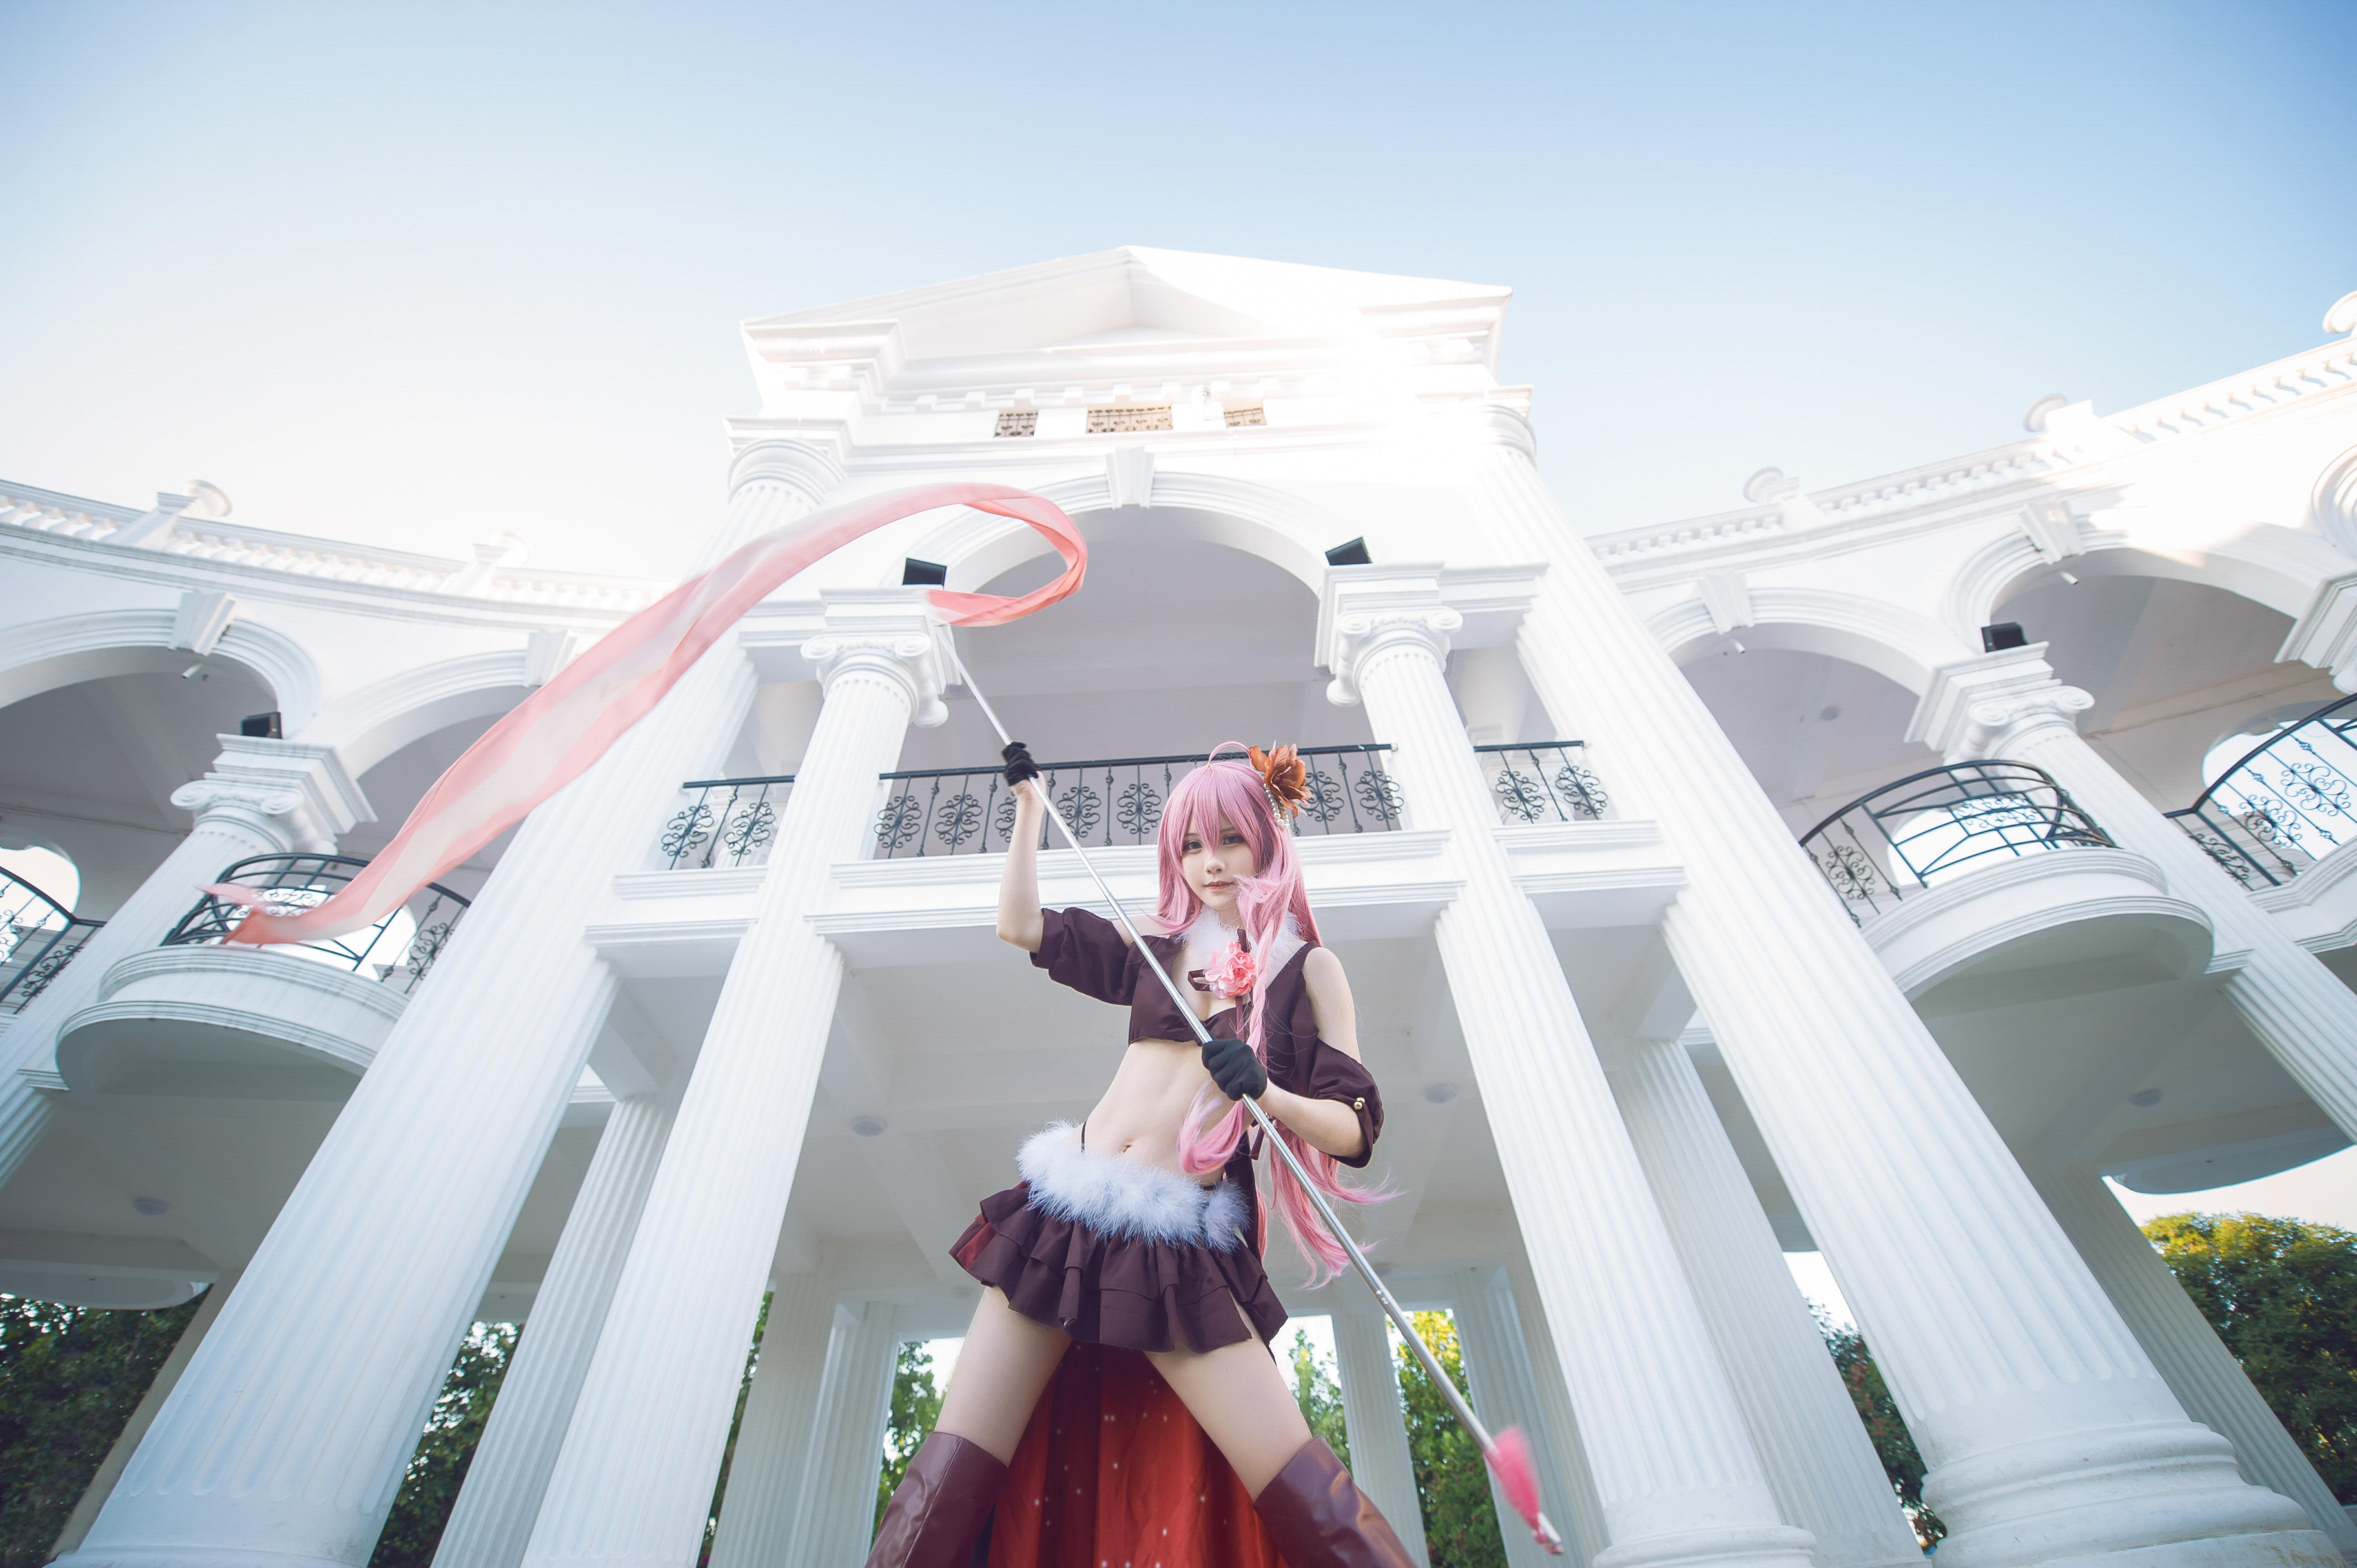 【Cosplay】VOCALOID 御姐